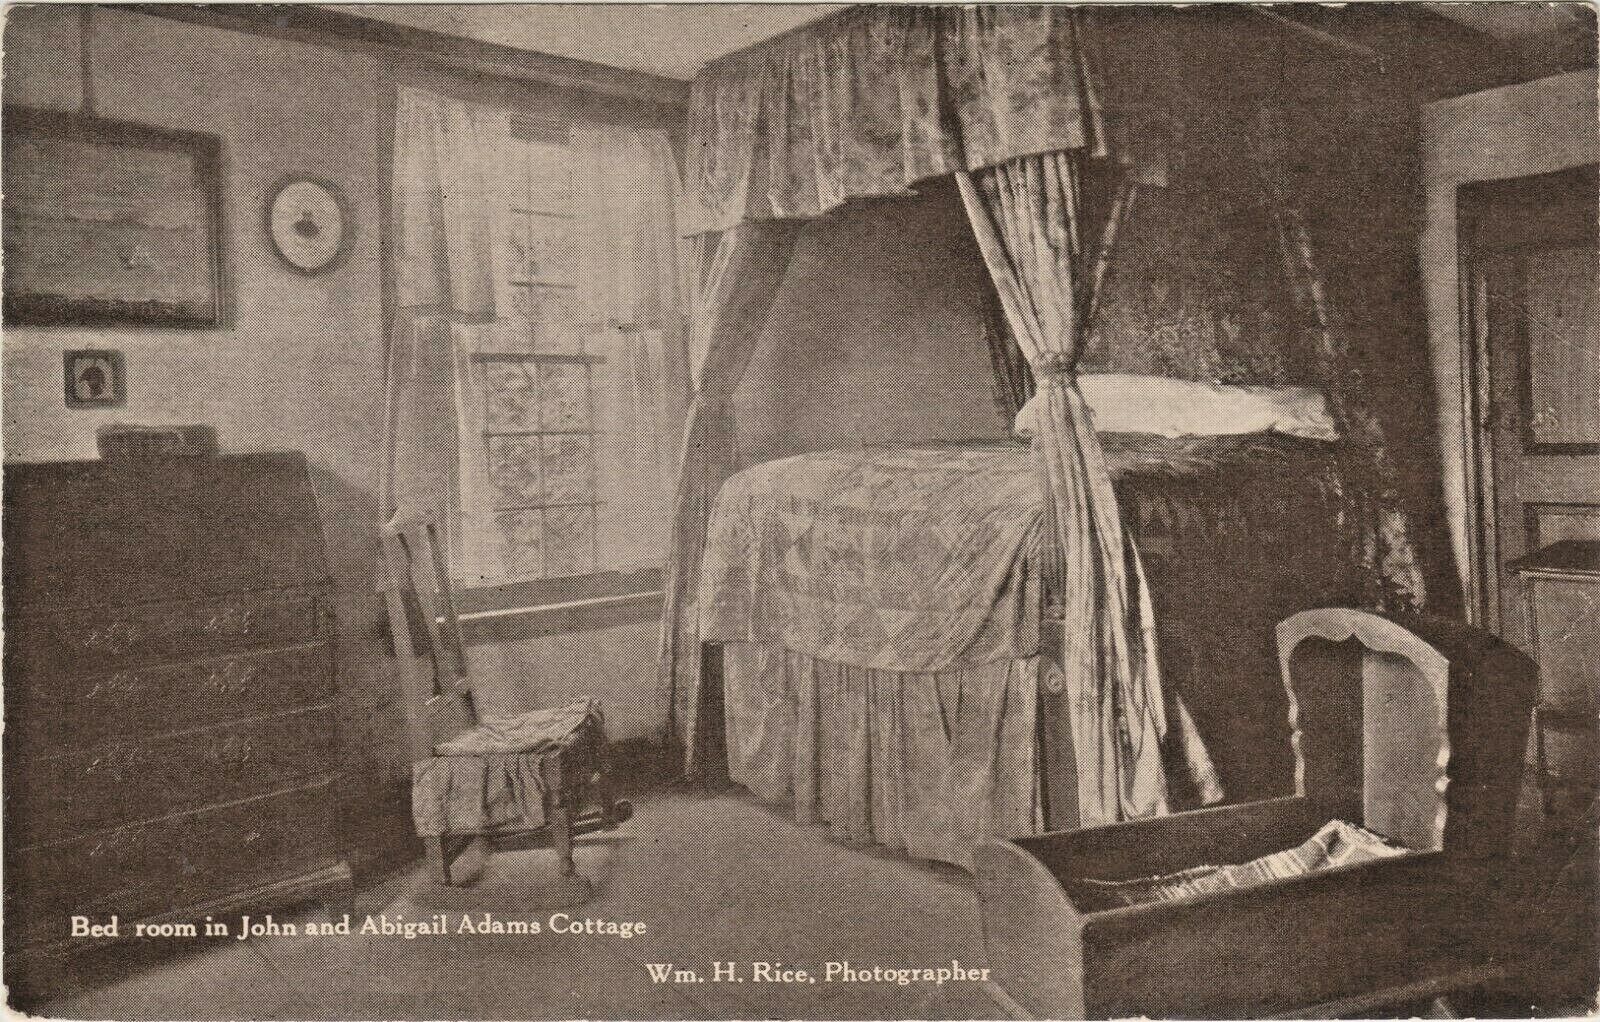 Bedroom in John & Abigail Adams Cottage, Canopy Bed, Rocking Chair, Baby Cradle